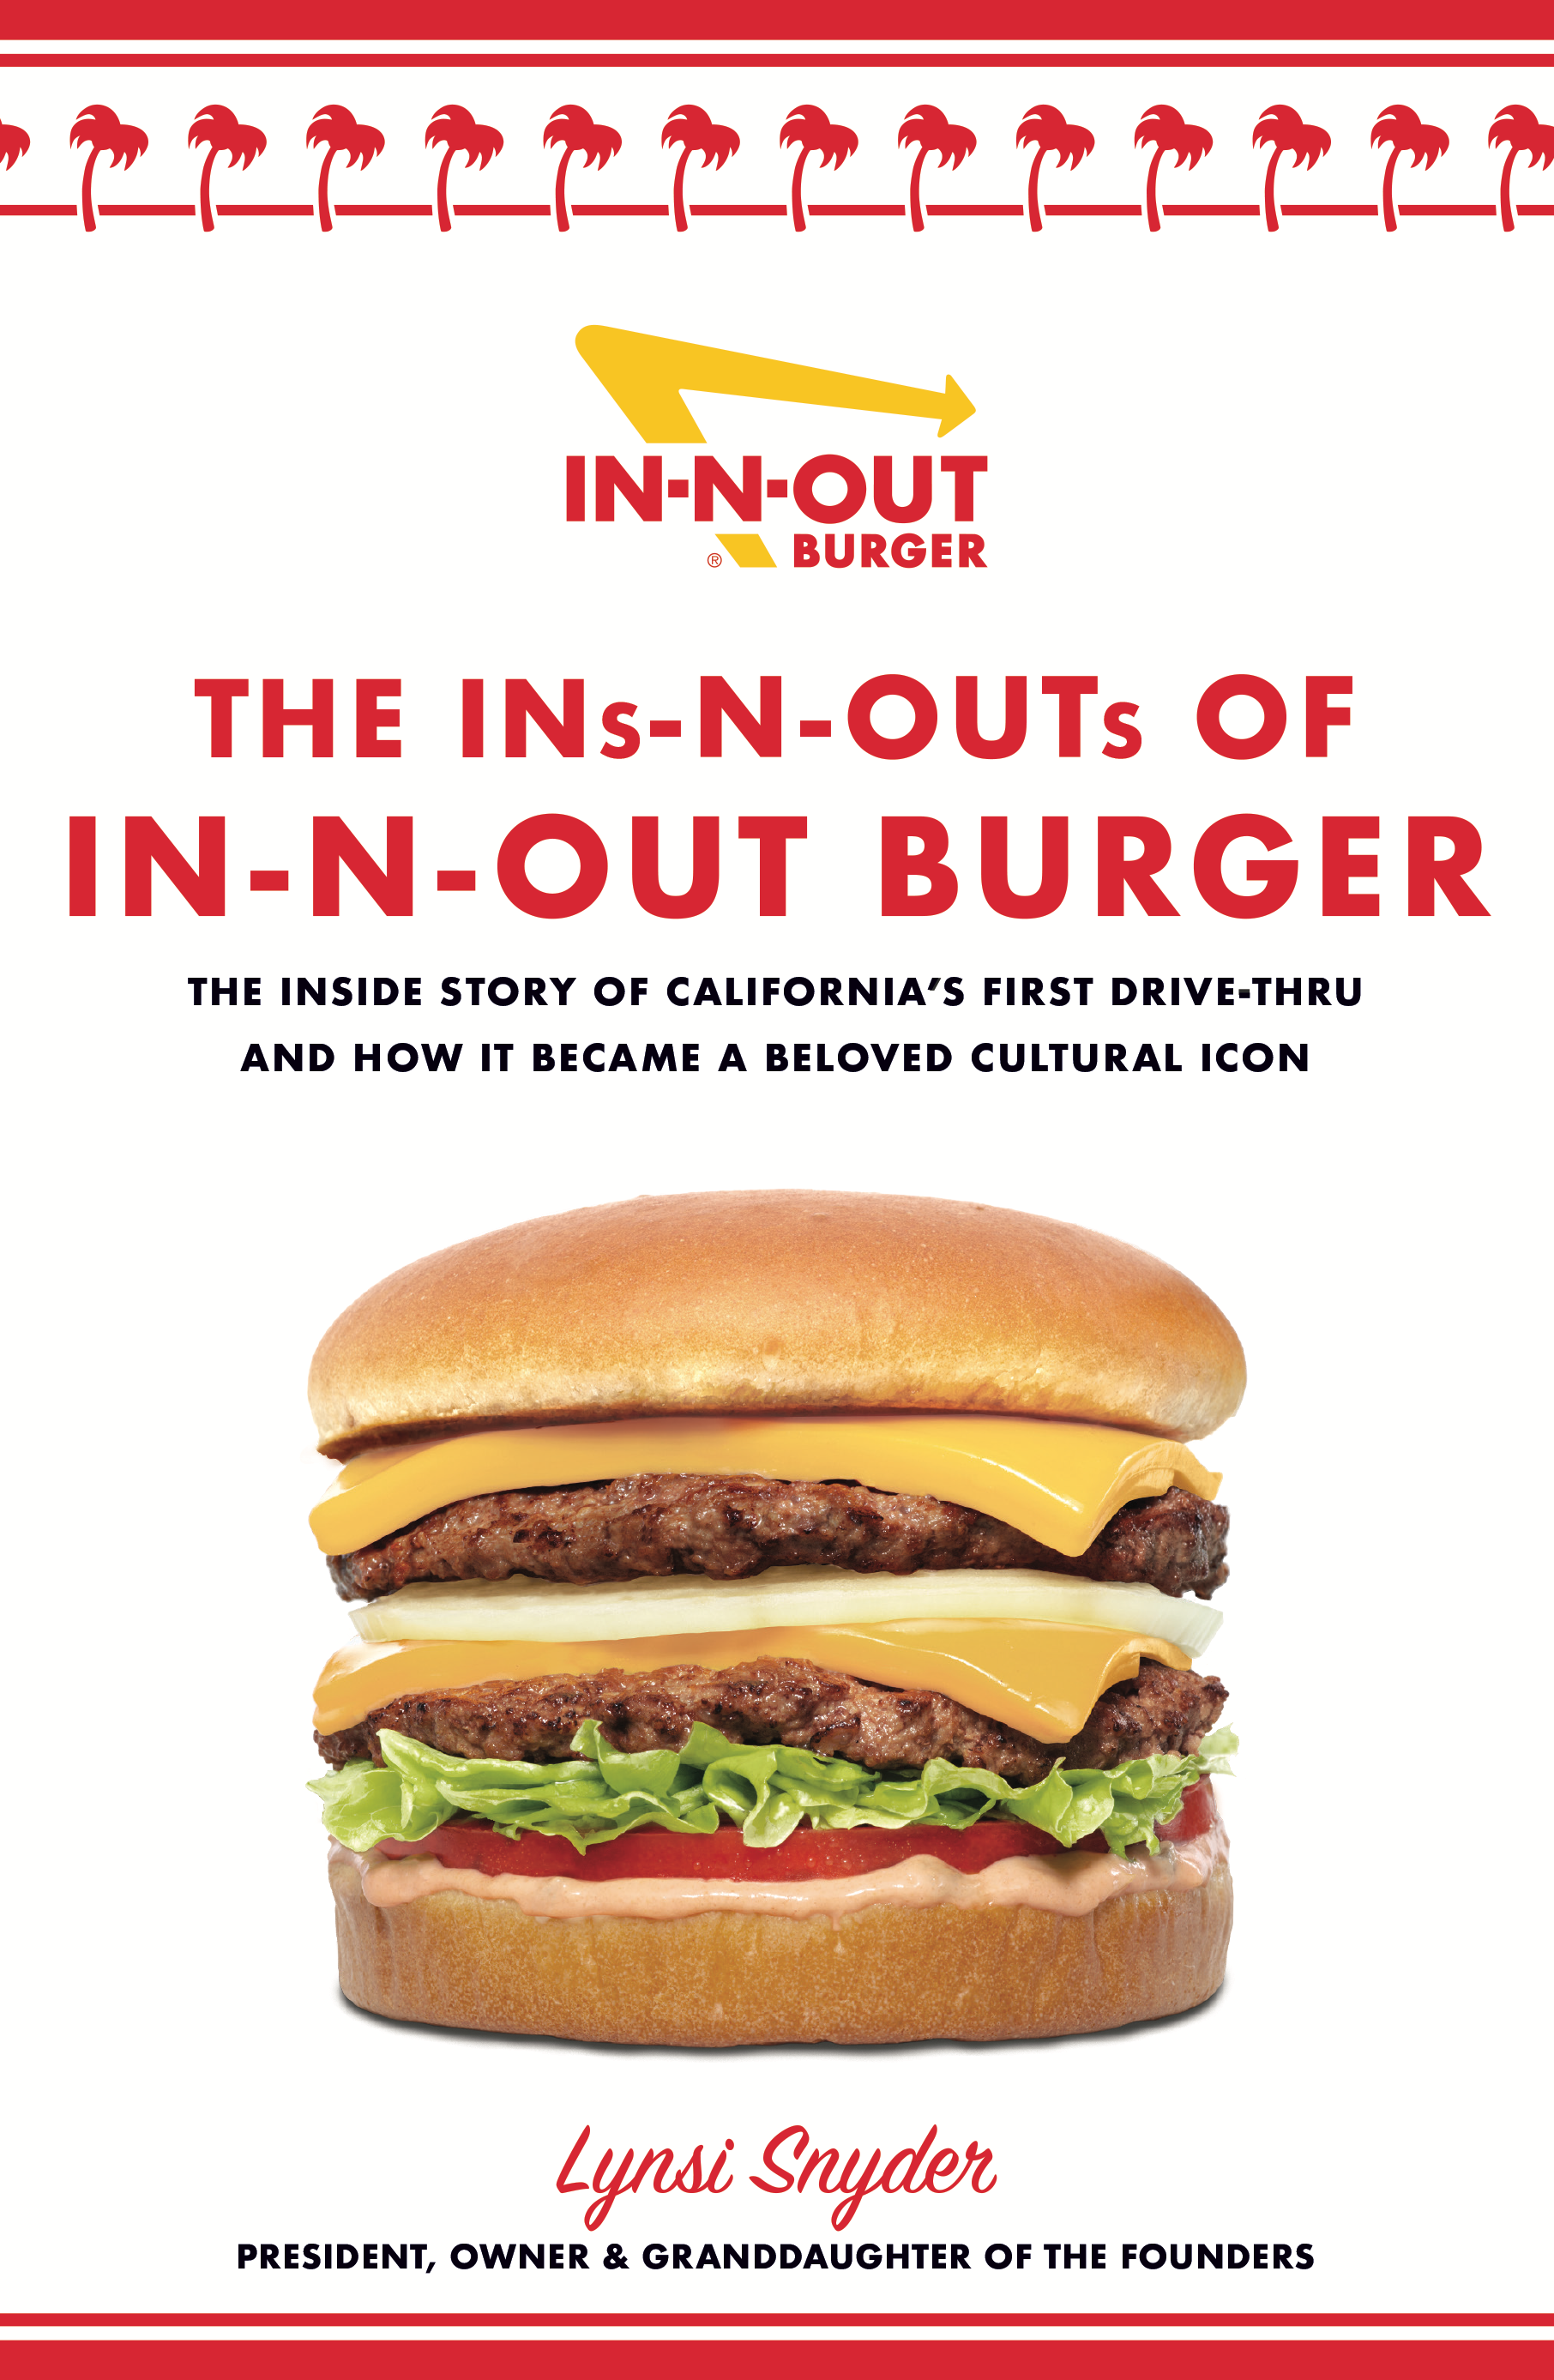 One of our recommended books is The Ins-N-Outs of In-N-Out Burger by Lynsi Snyder